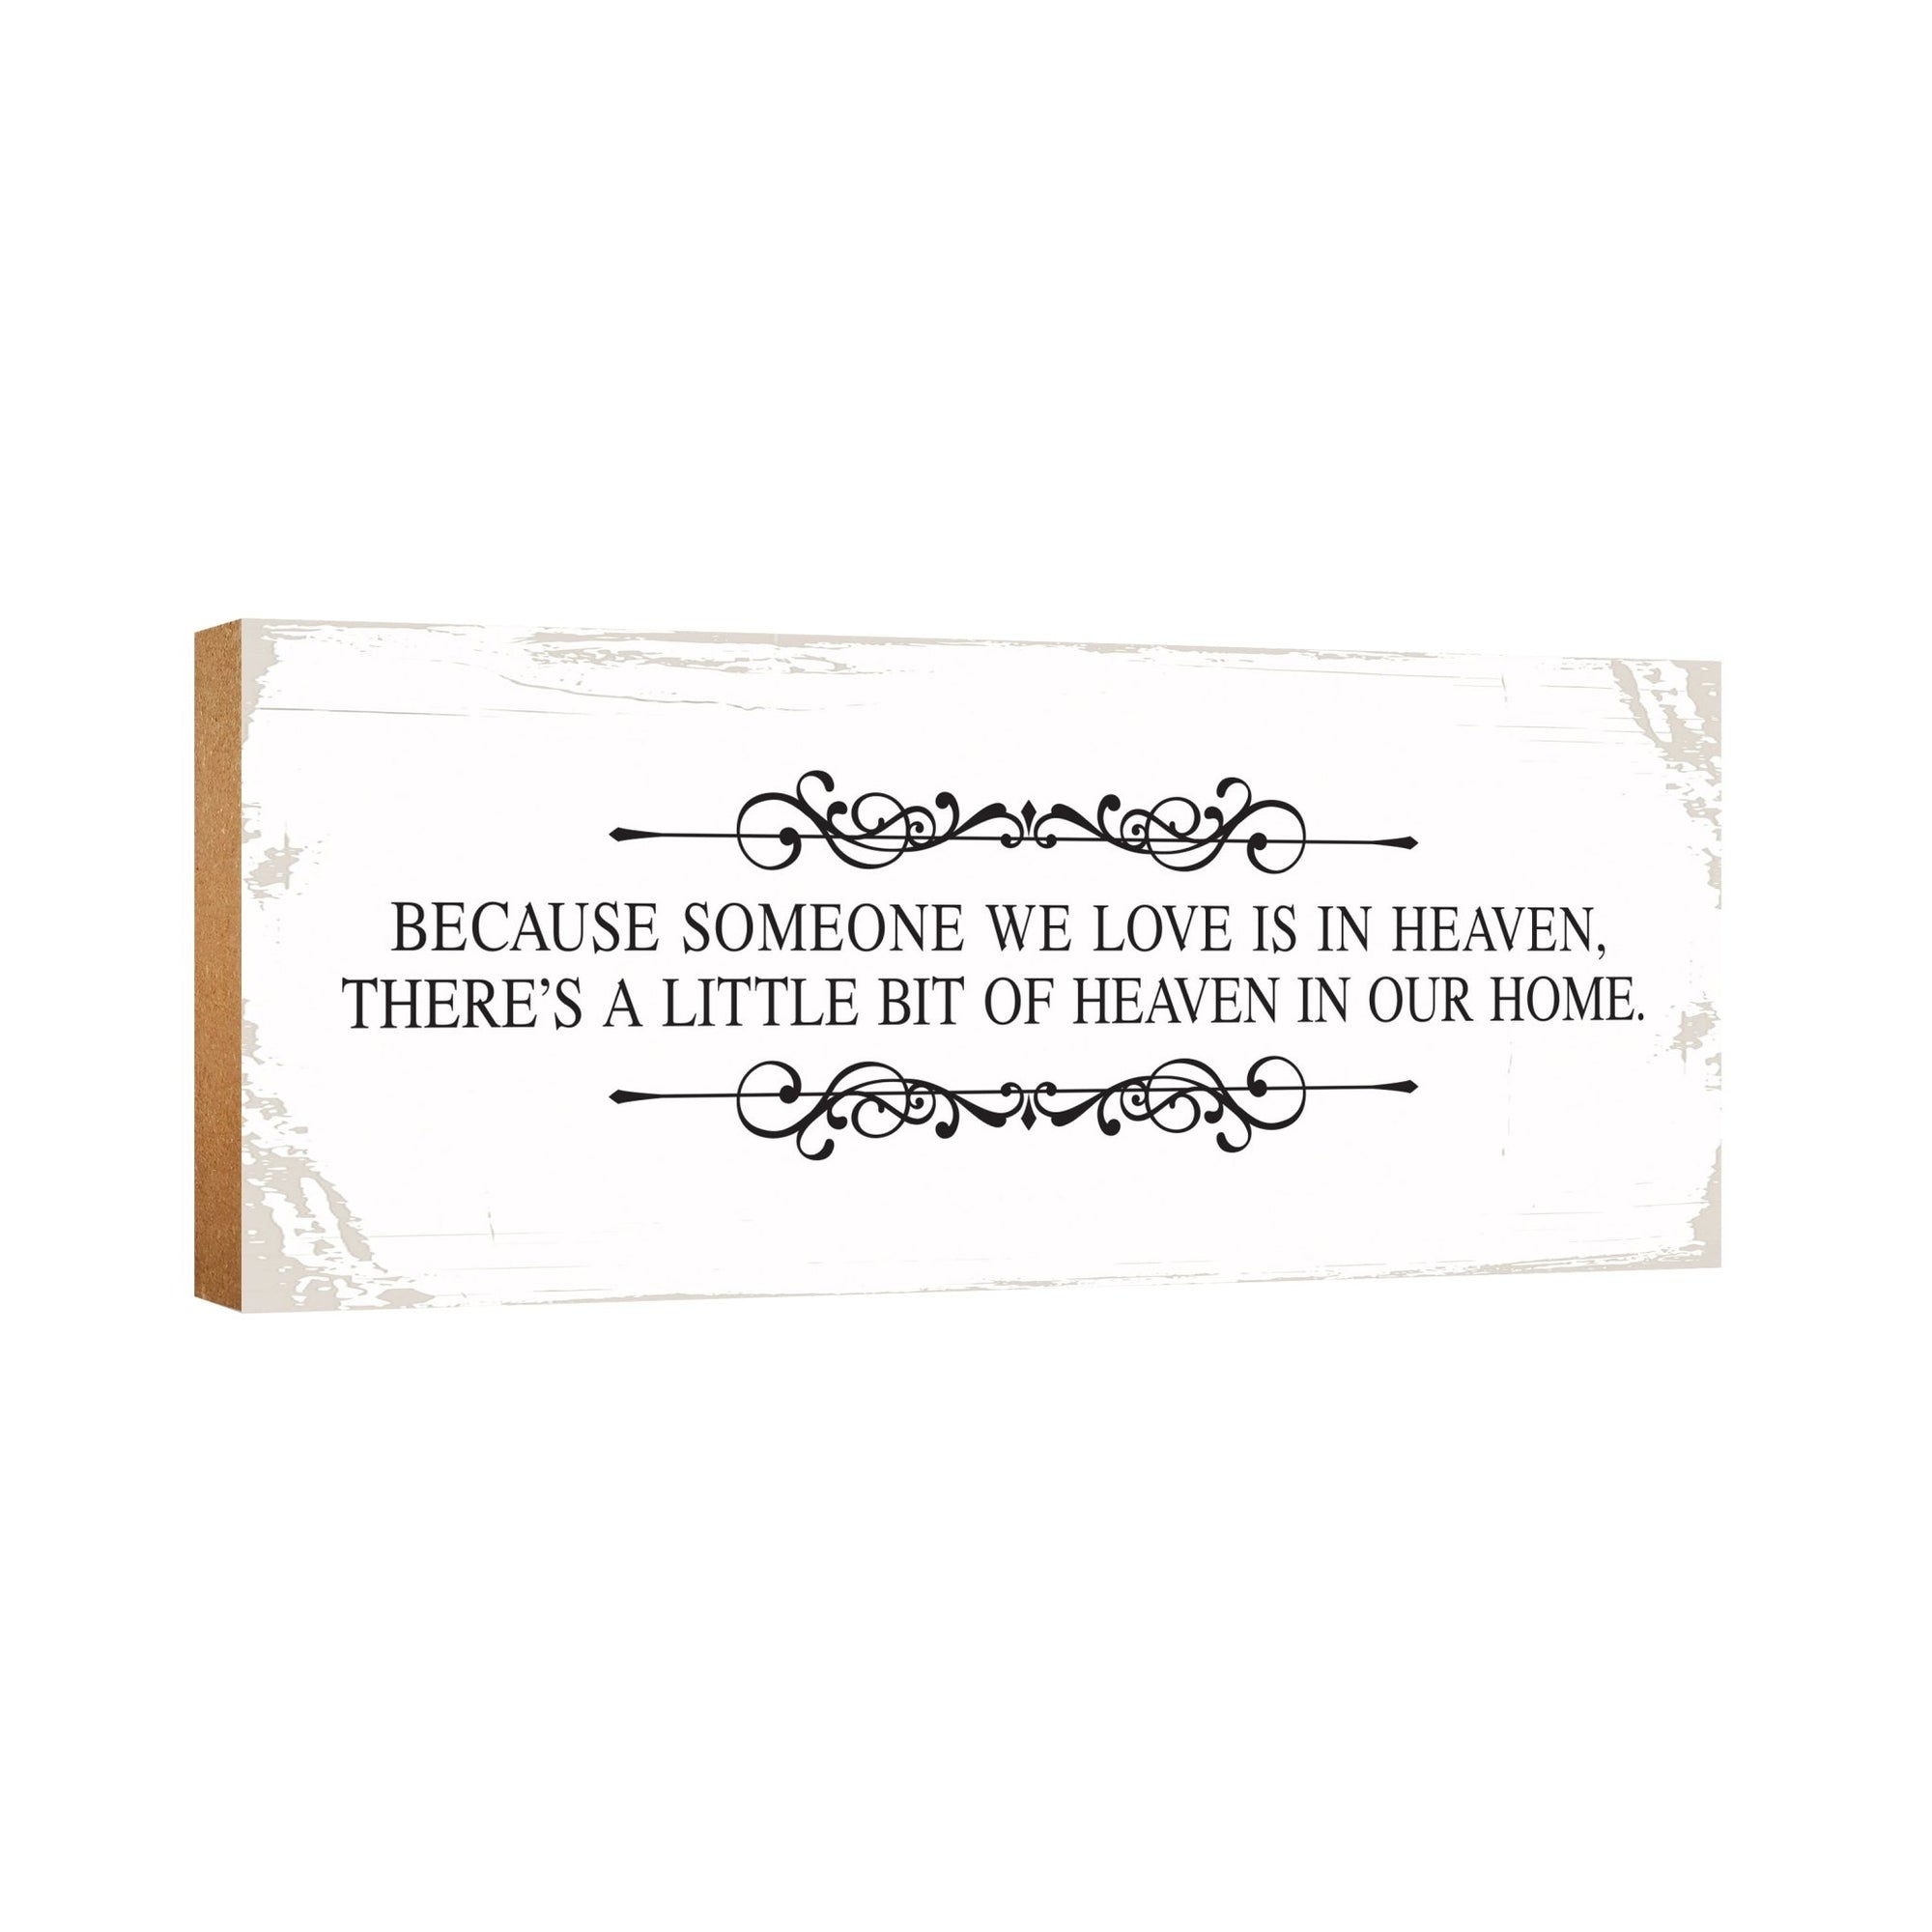 Modern Inspirational Pet Memorial 4x10 inches Wooden Sign (Because Someone We Love) Tabletop Plaque Home Decoration Loss of Pet Bereavement Sympathy Keepsake - LifeSong Milestones